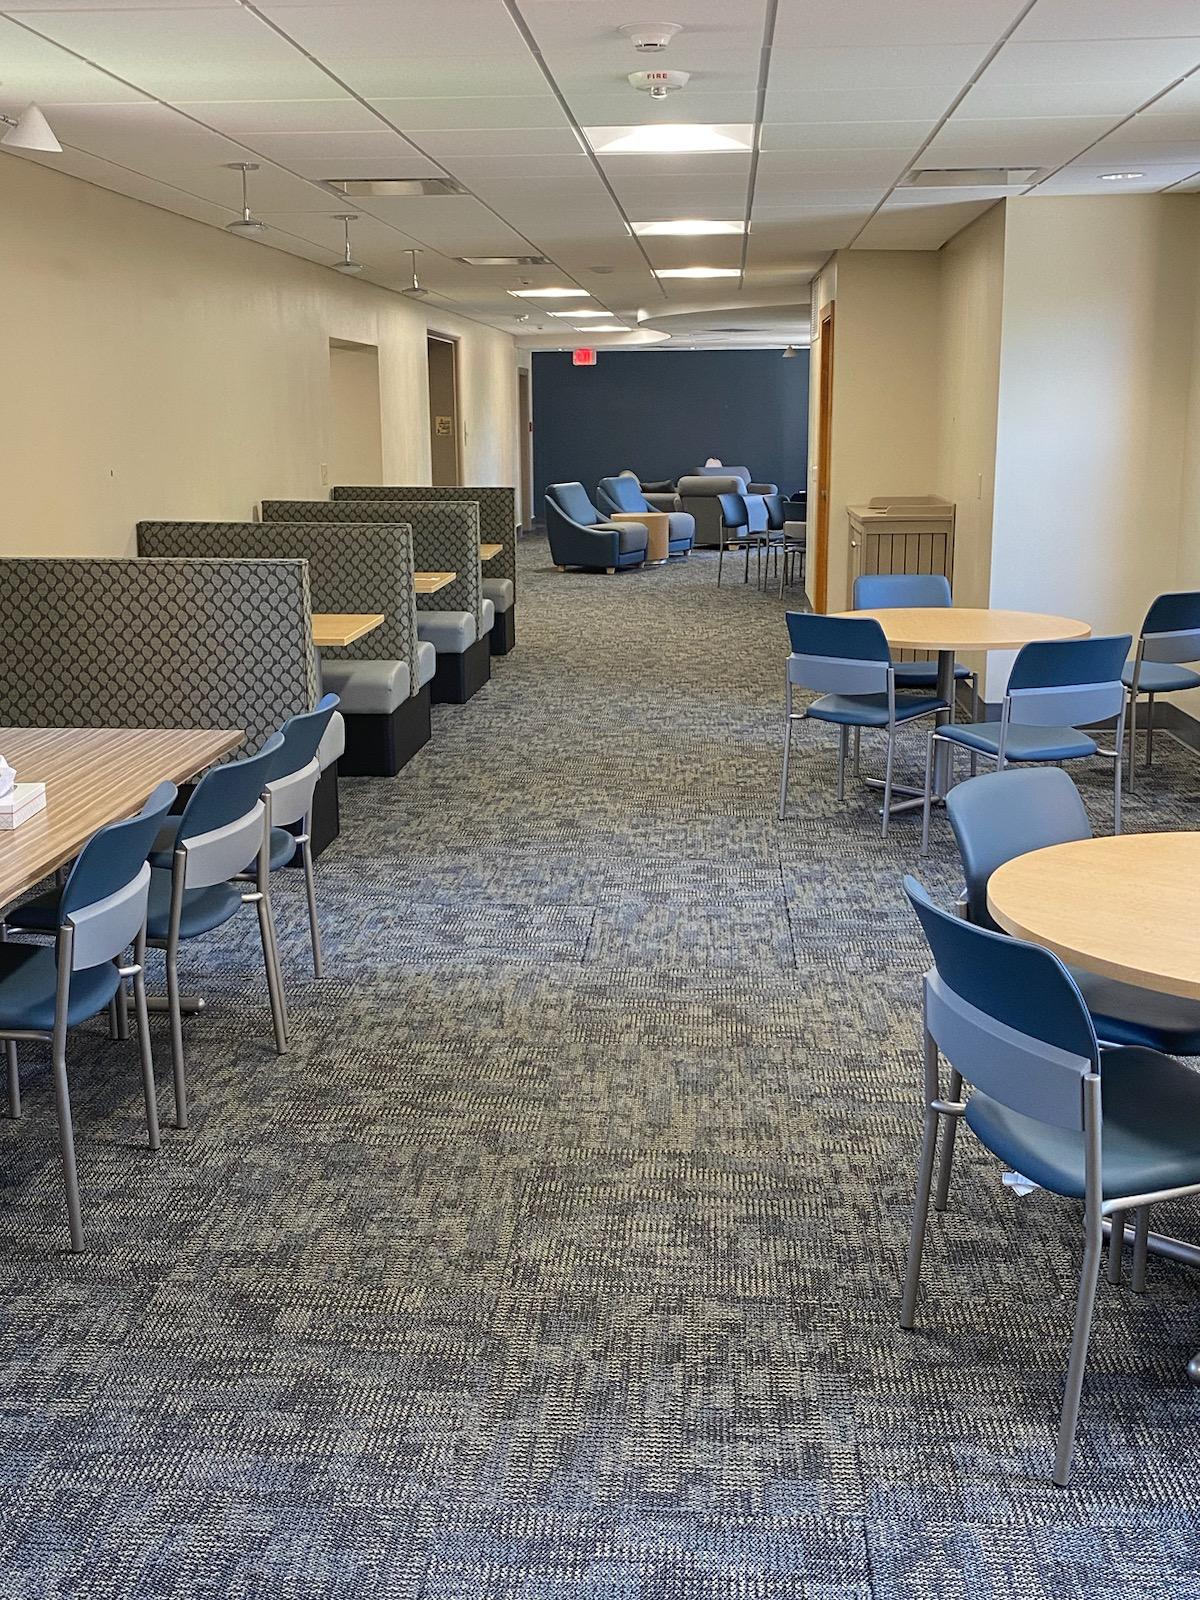 Student lounge with tables and comfortable chairs